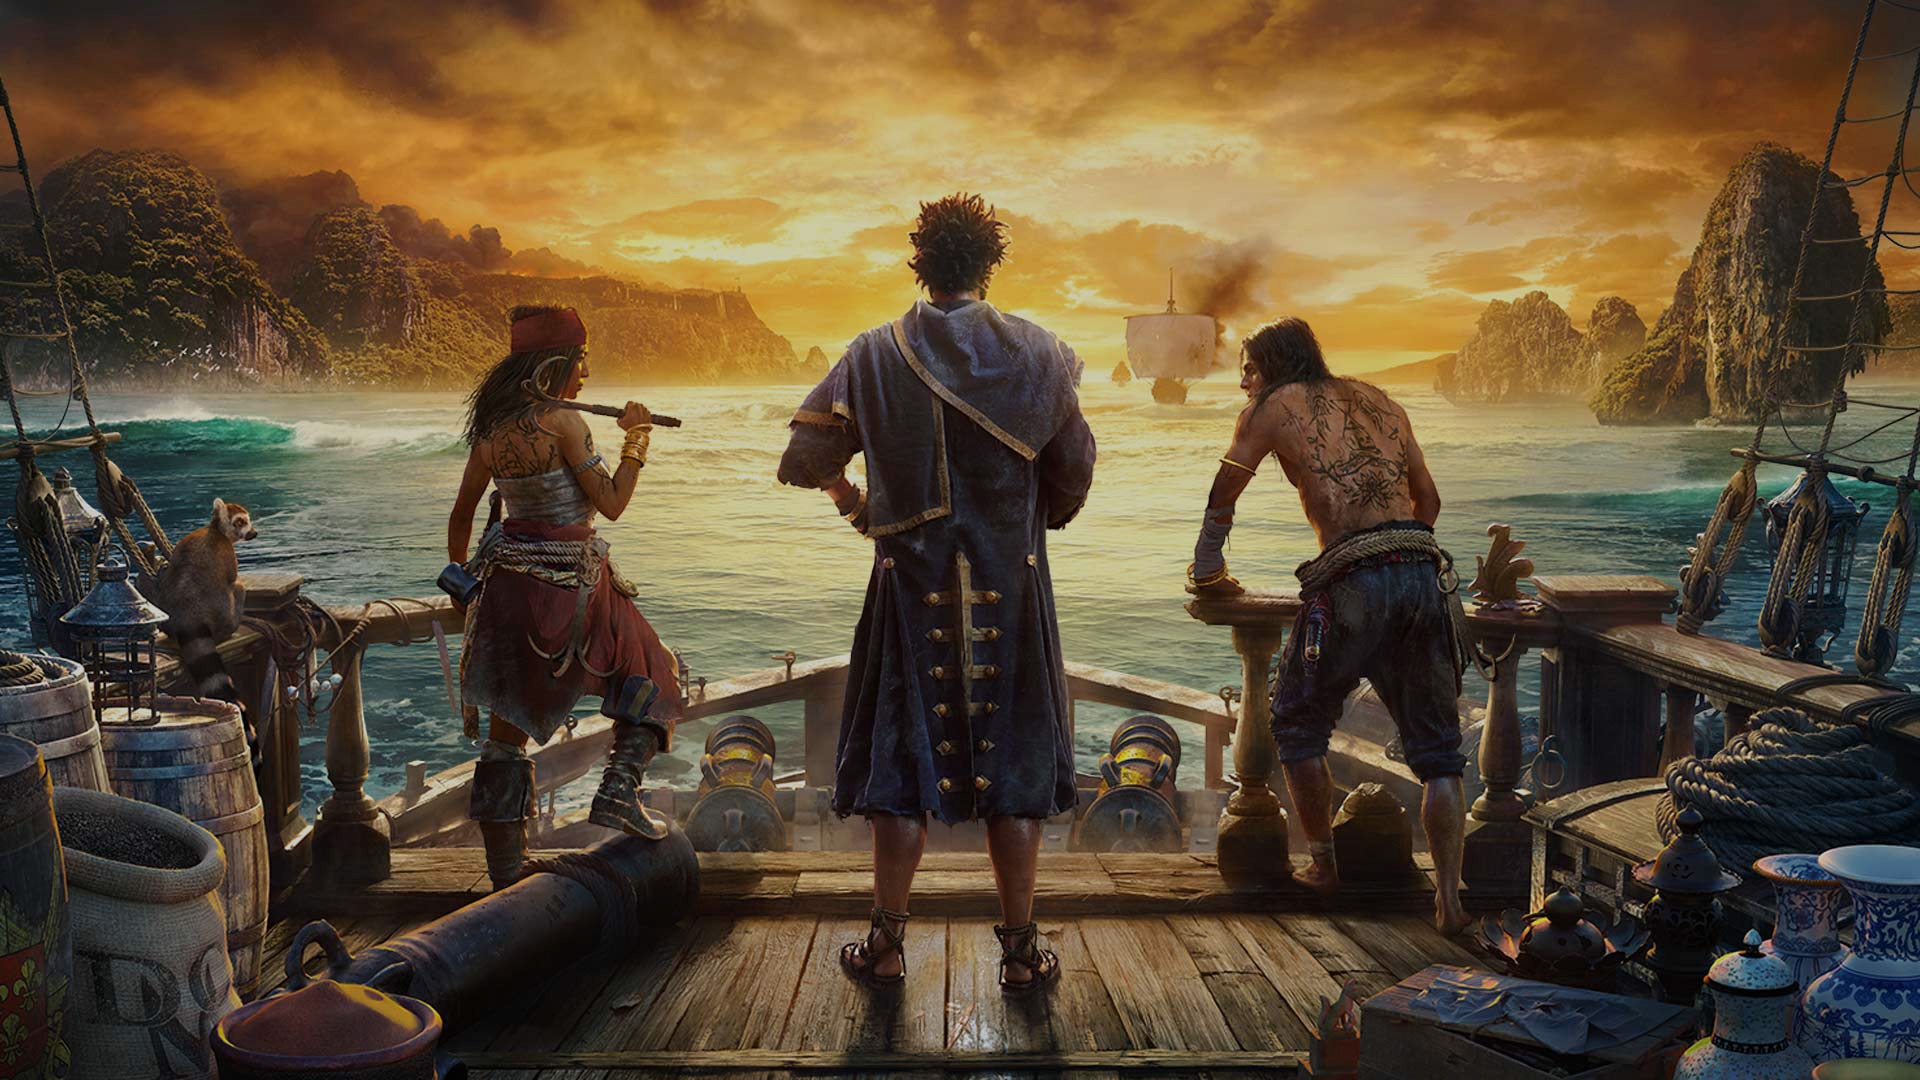 Three pirates stand on the back of a ship with their backs to the camera